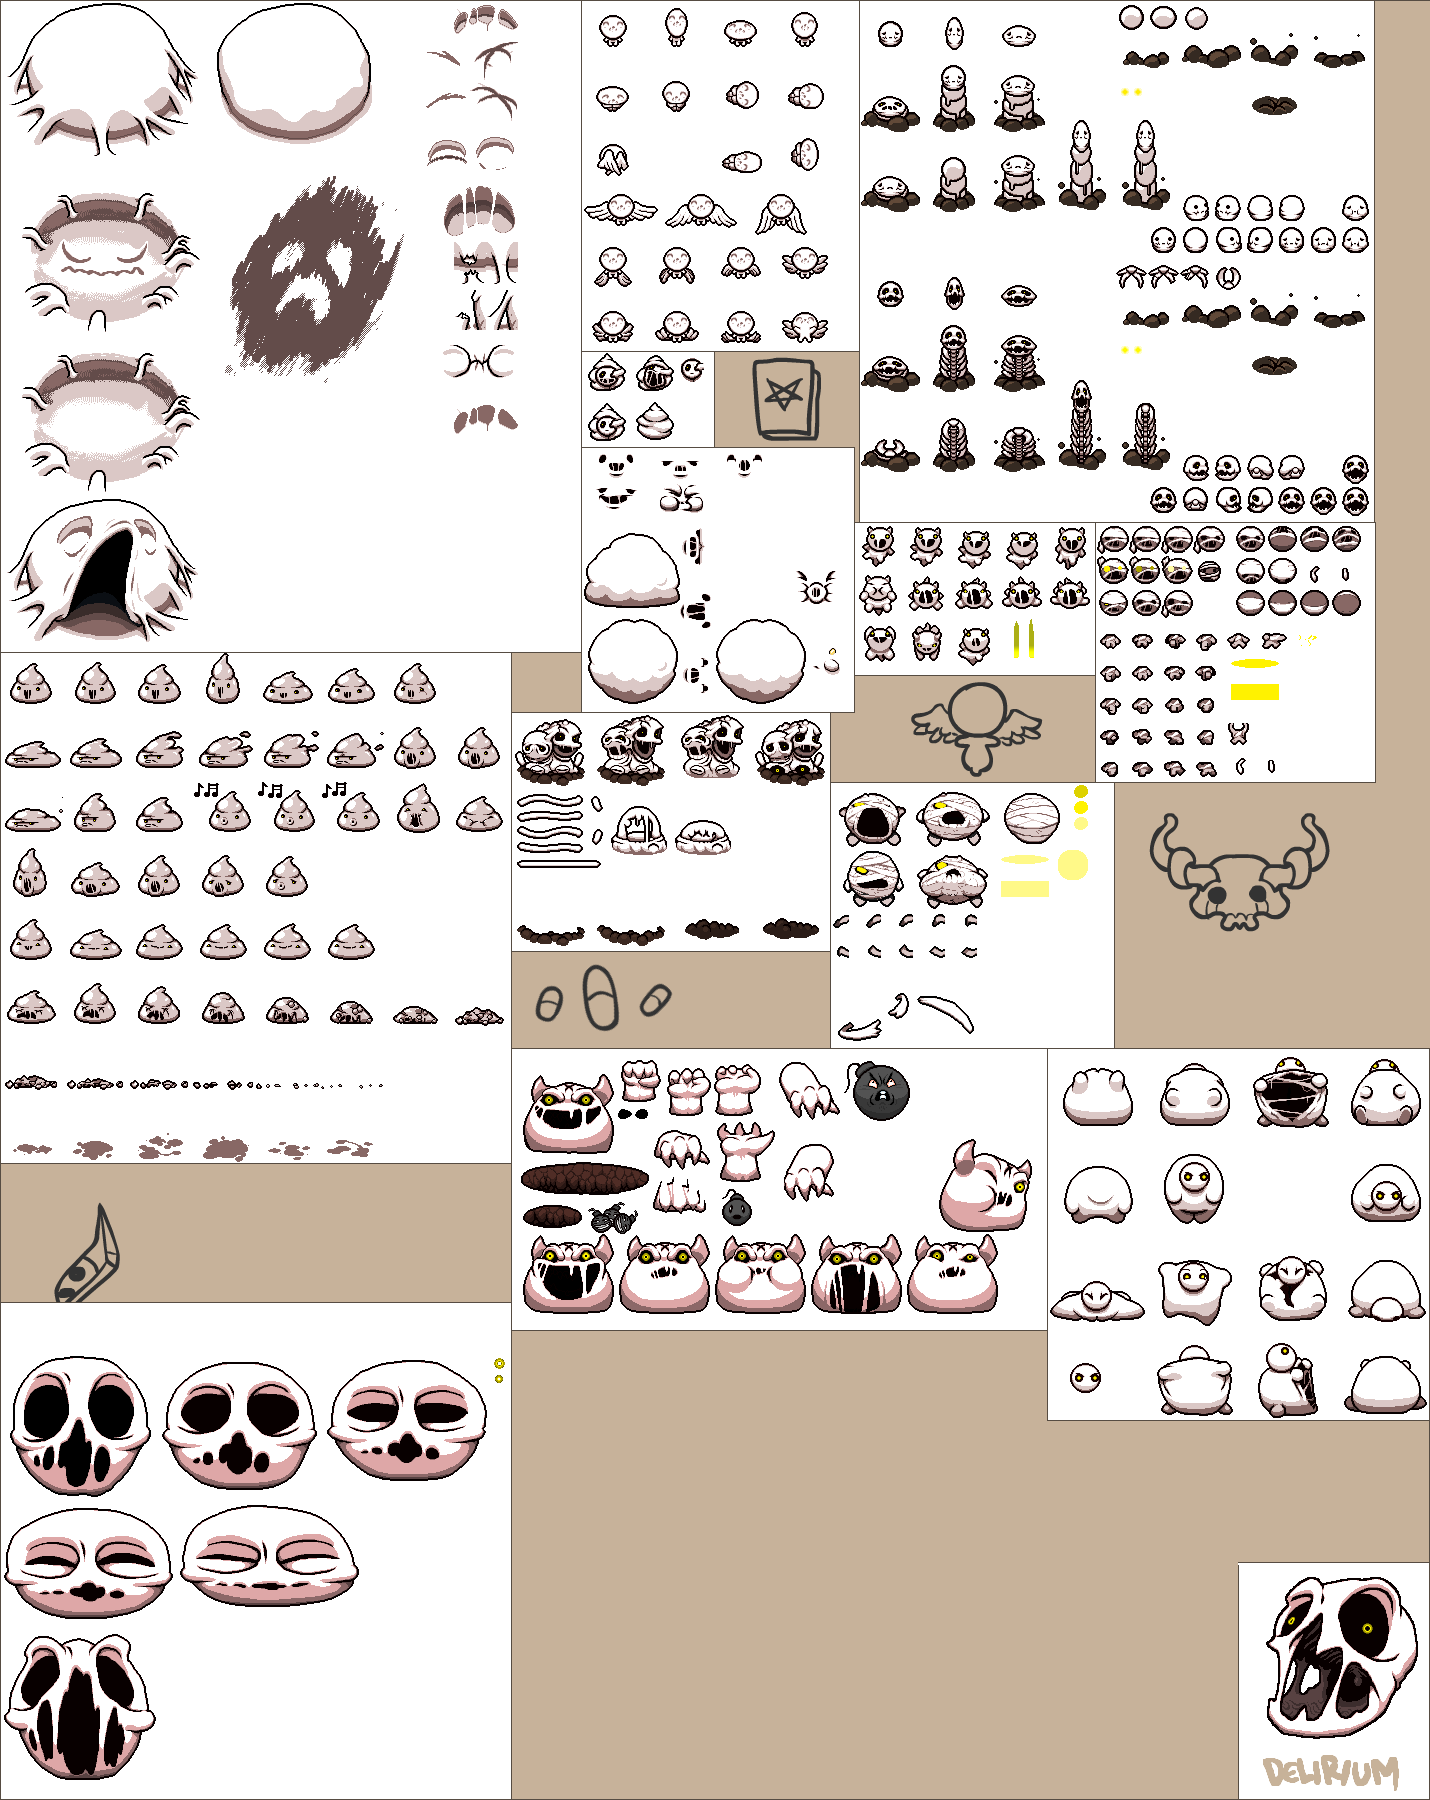 The Binding of Isaac: Rebirth - Delirium Forms (Afterbirth+)